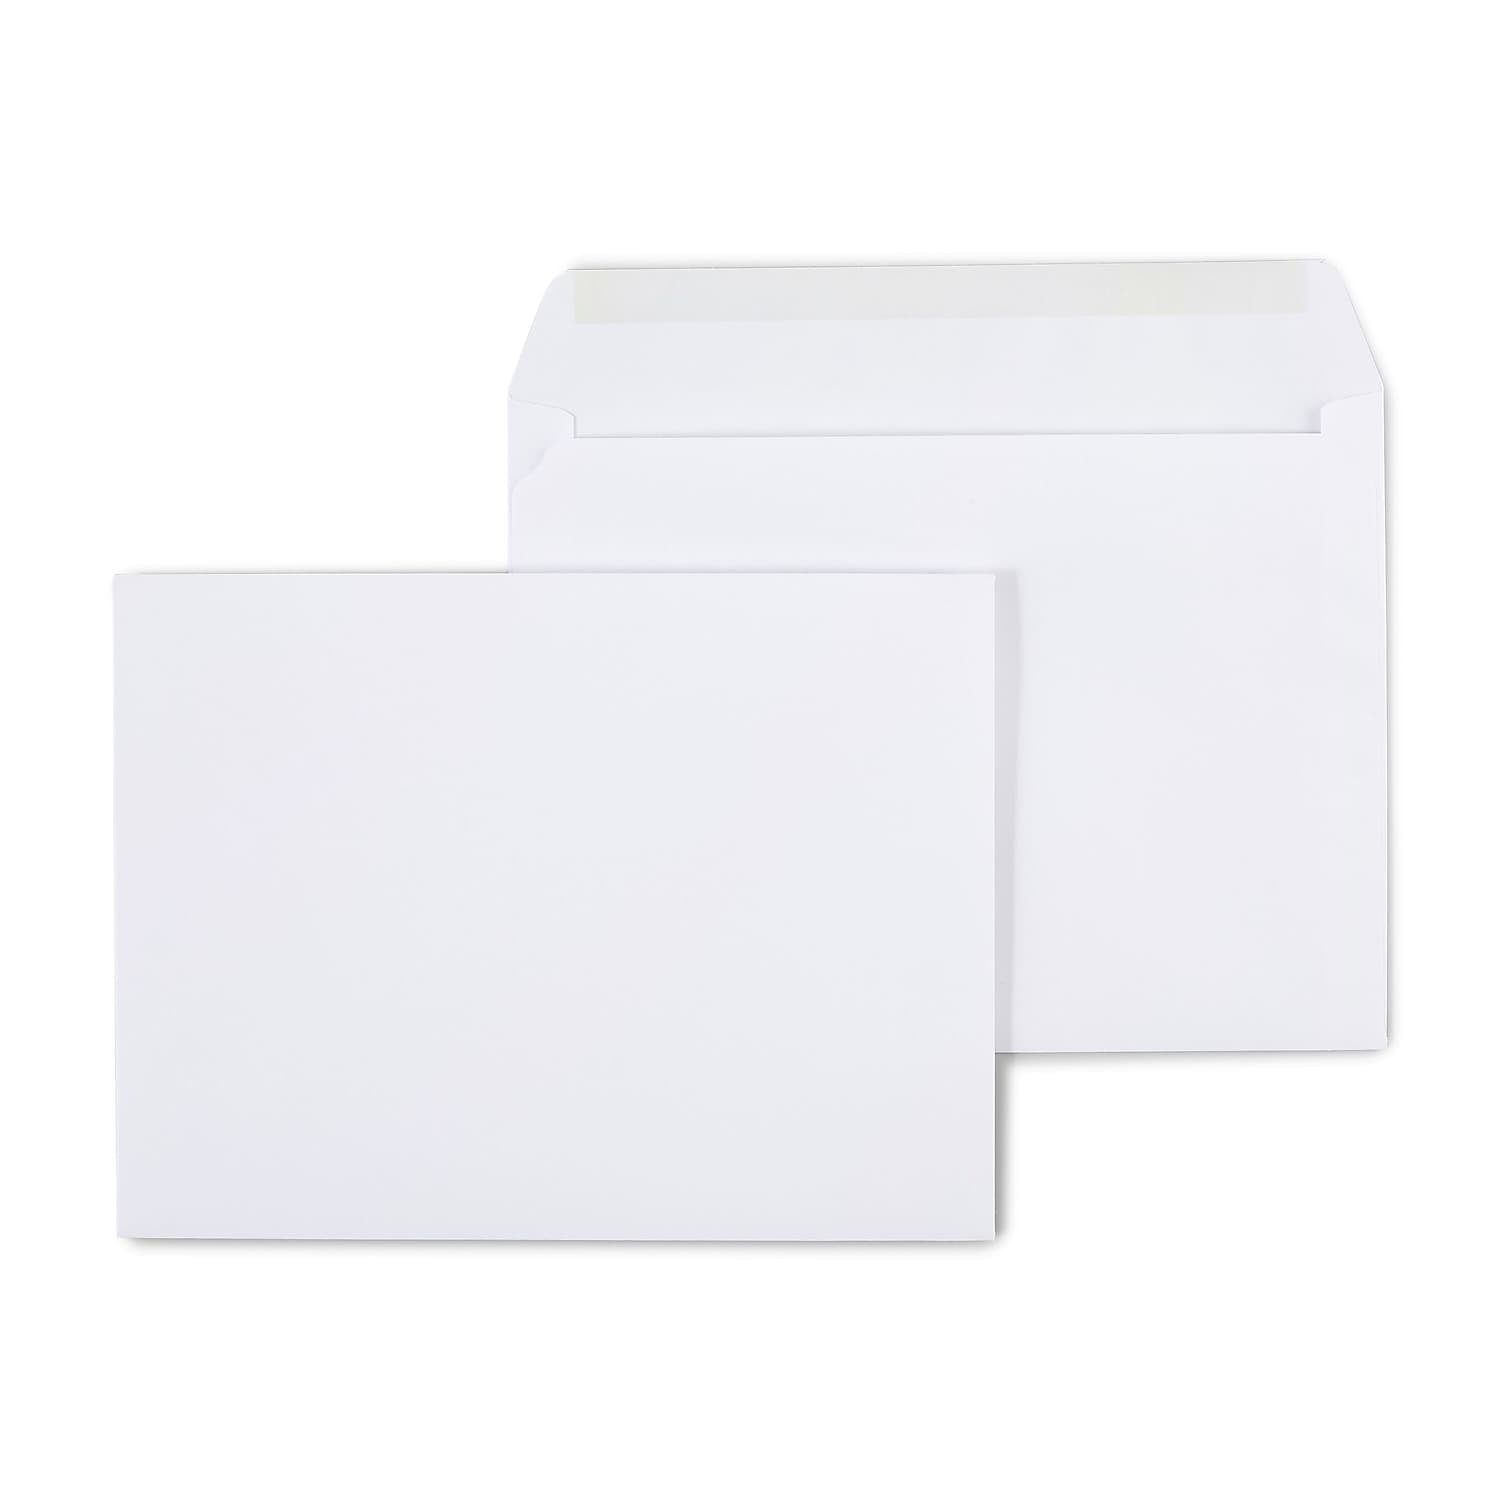 Staples Fanfold Paper, 9.5 x 11, Blank White - 1000 sheets